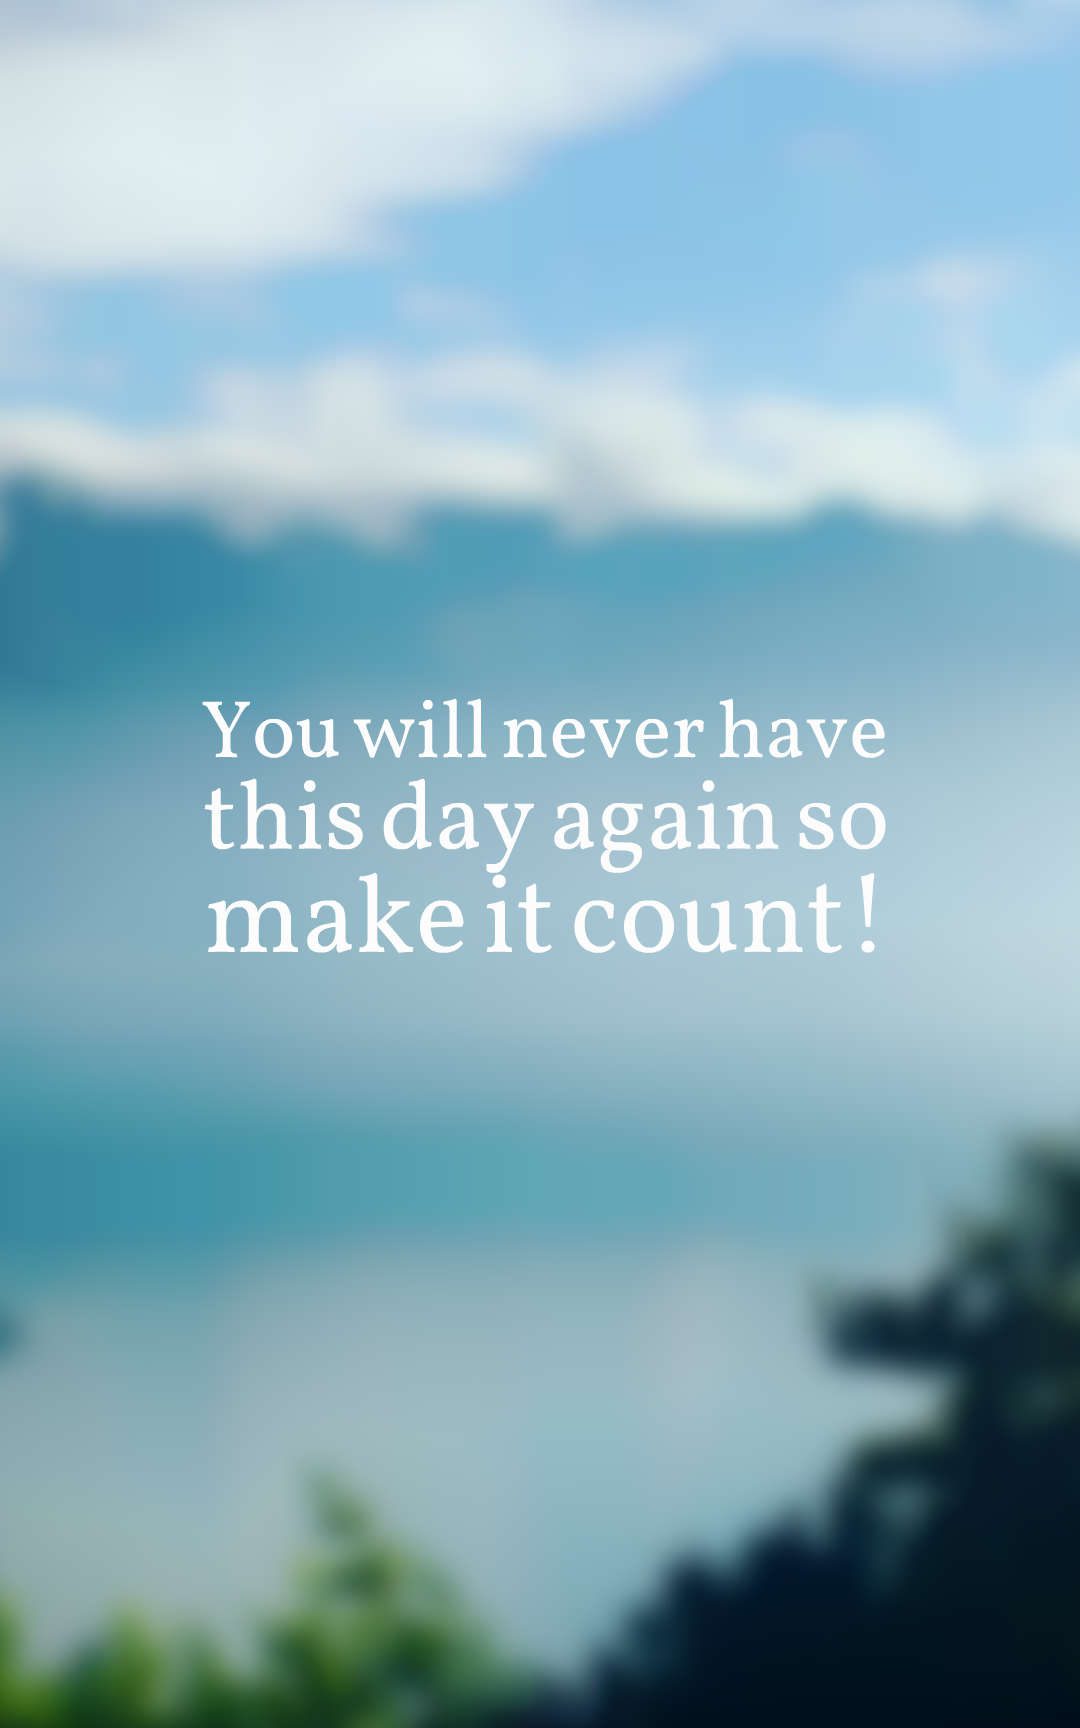 You will never have this day again so make it count!